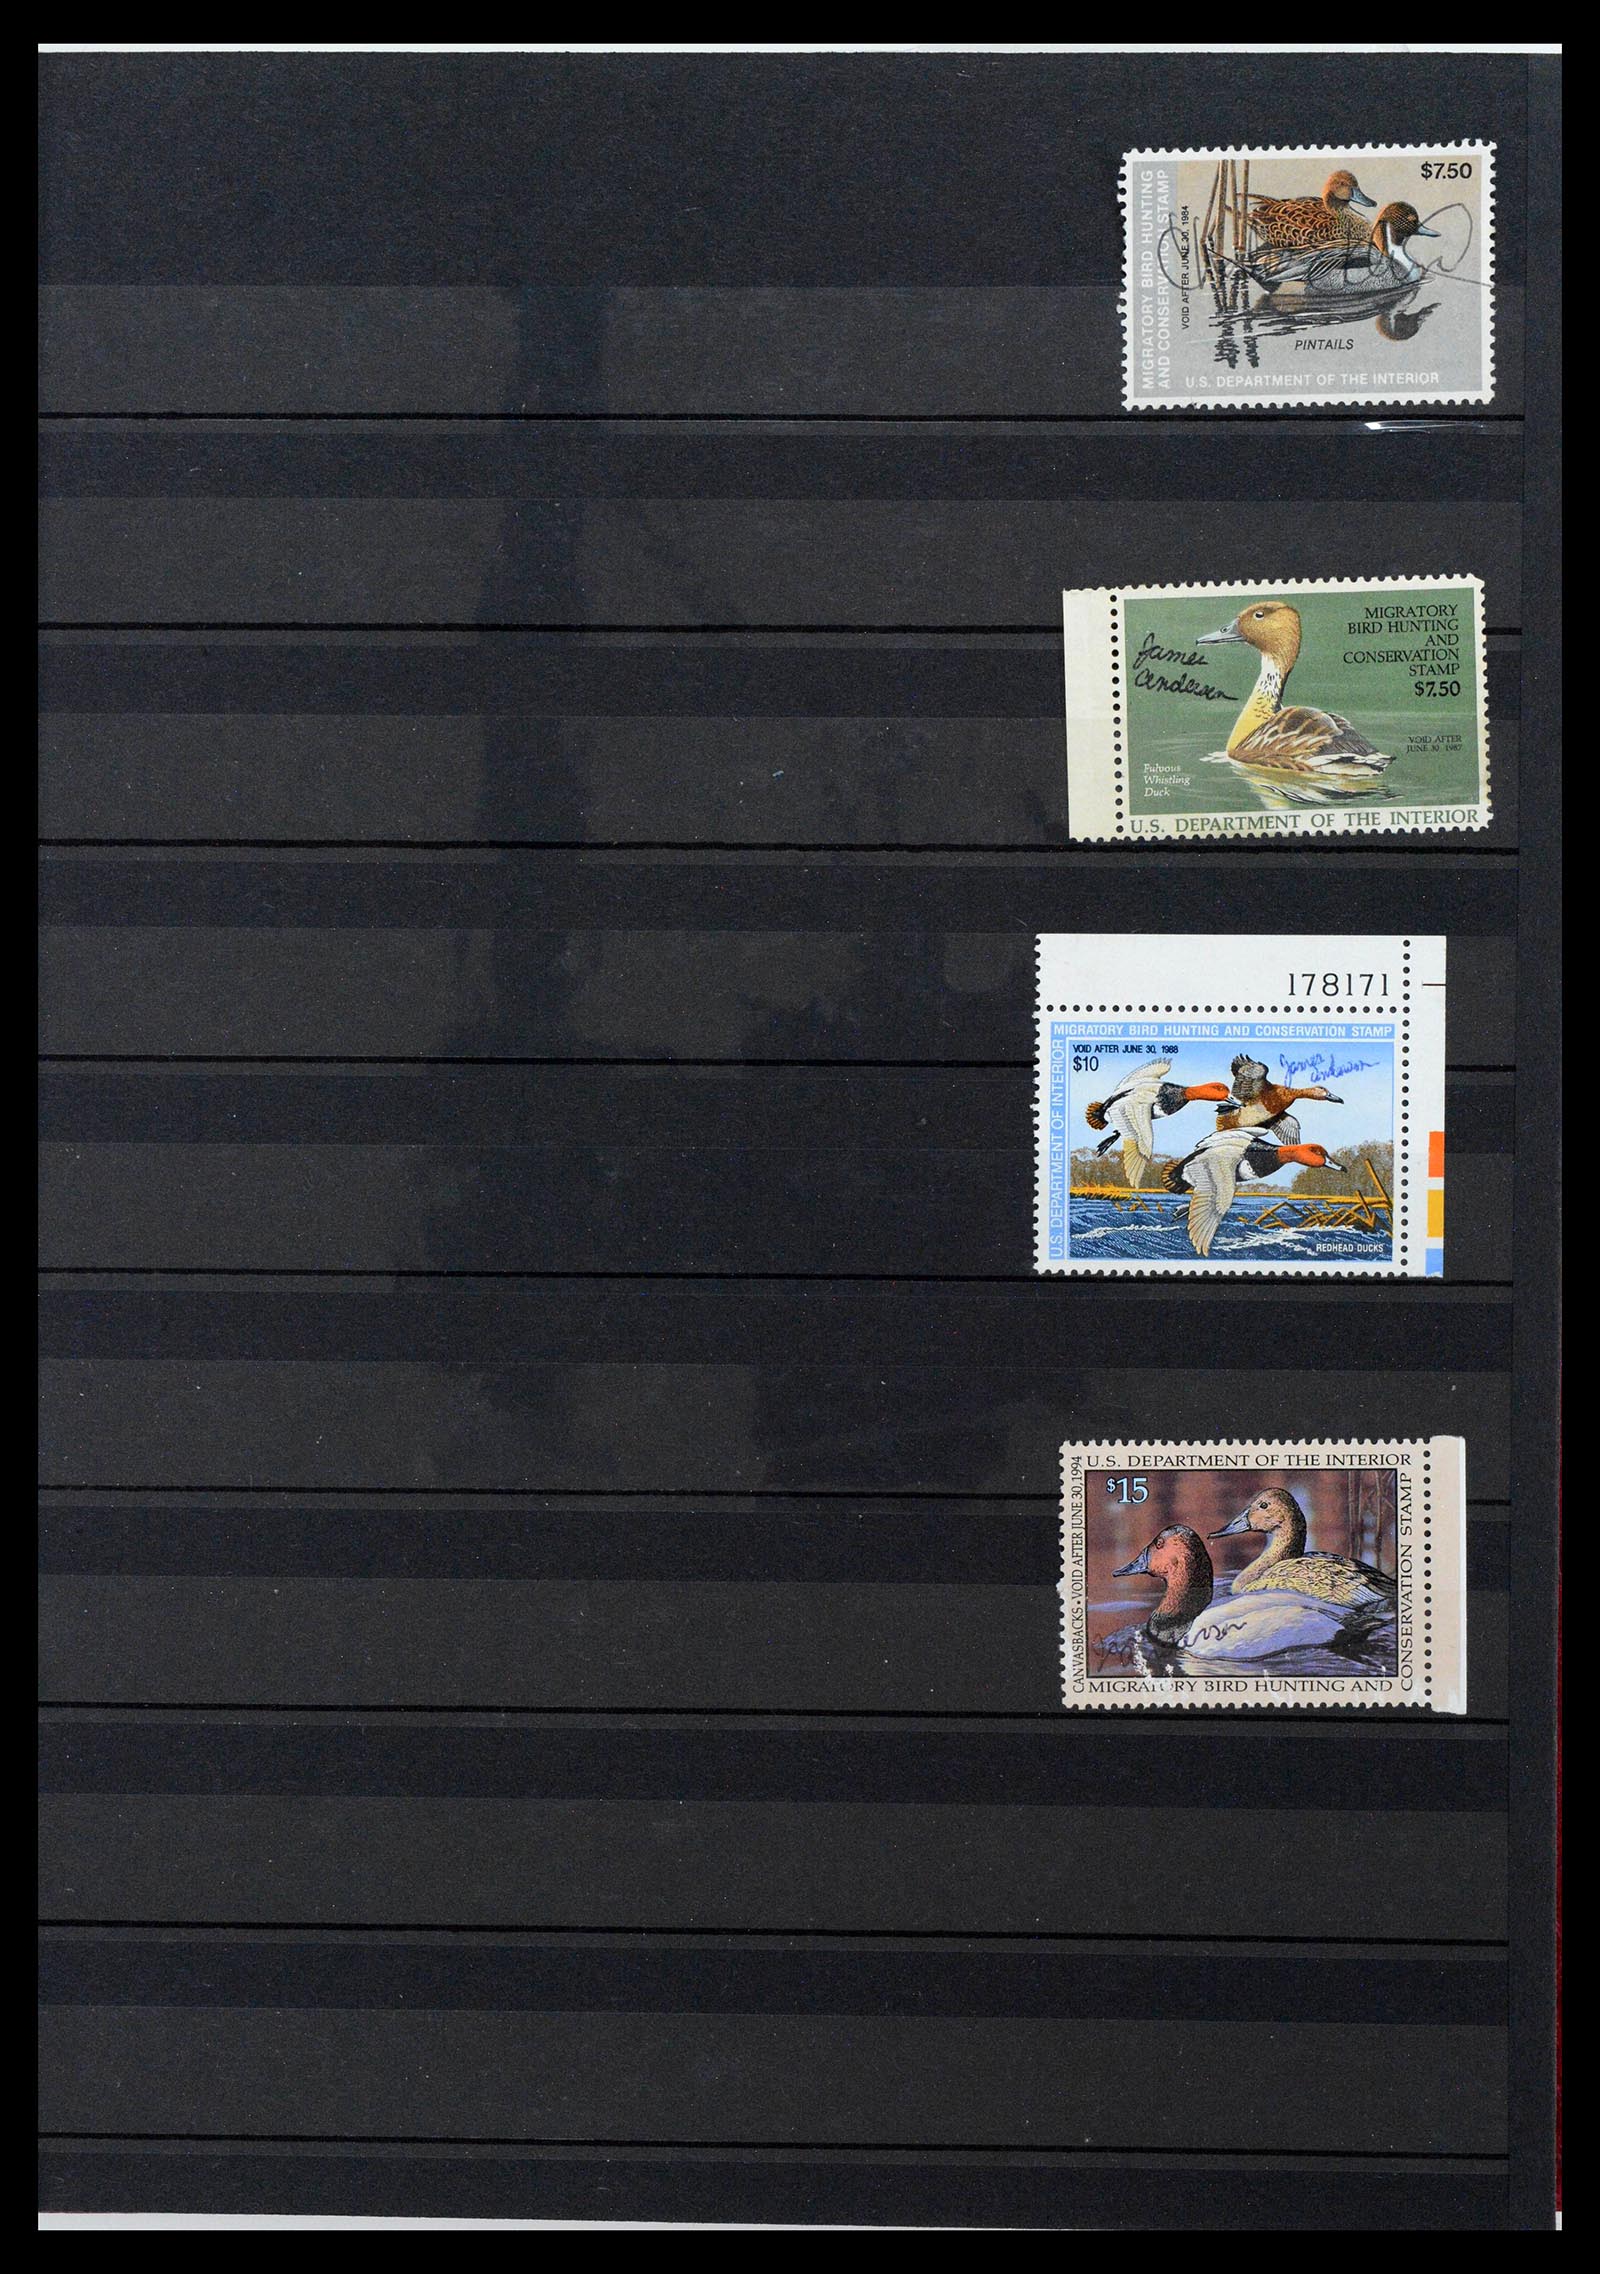 39426 0011 - Stamp collection 39426 USA duckstamps 1934-2007.